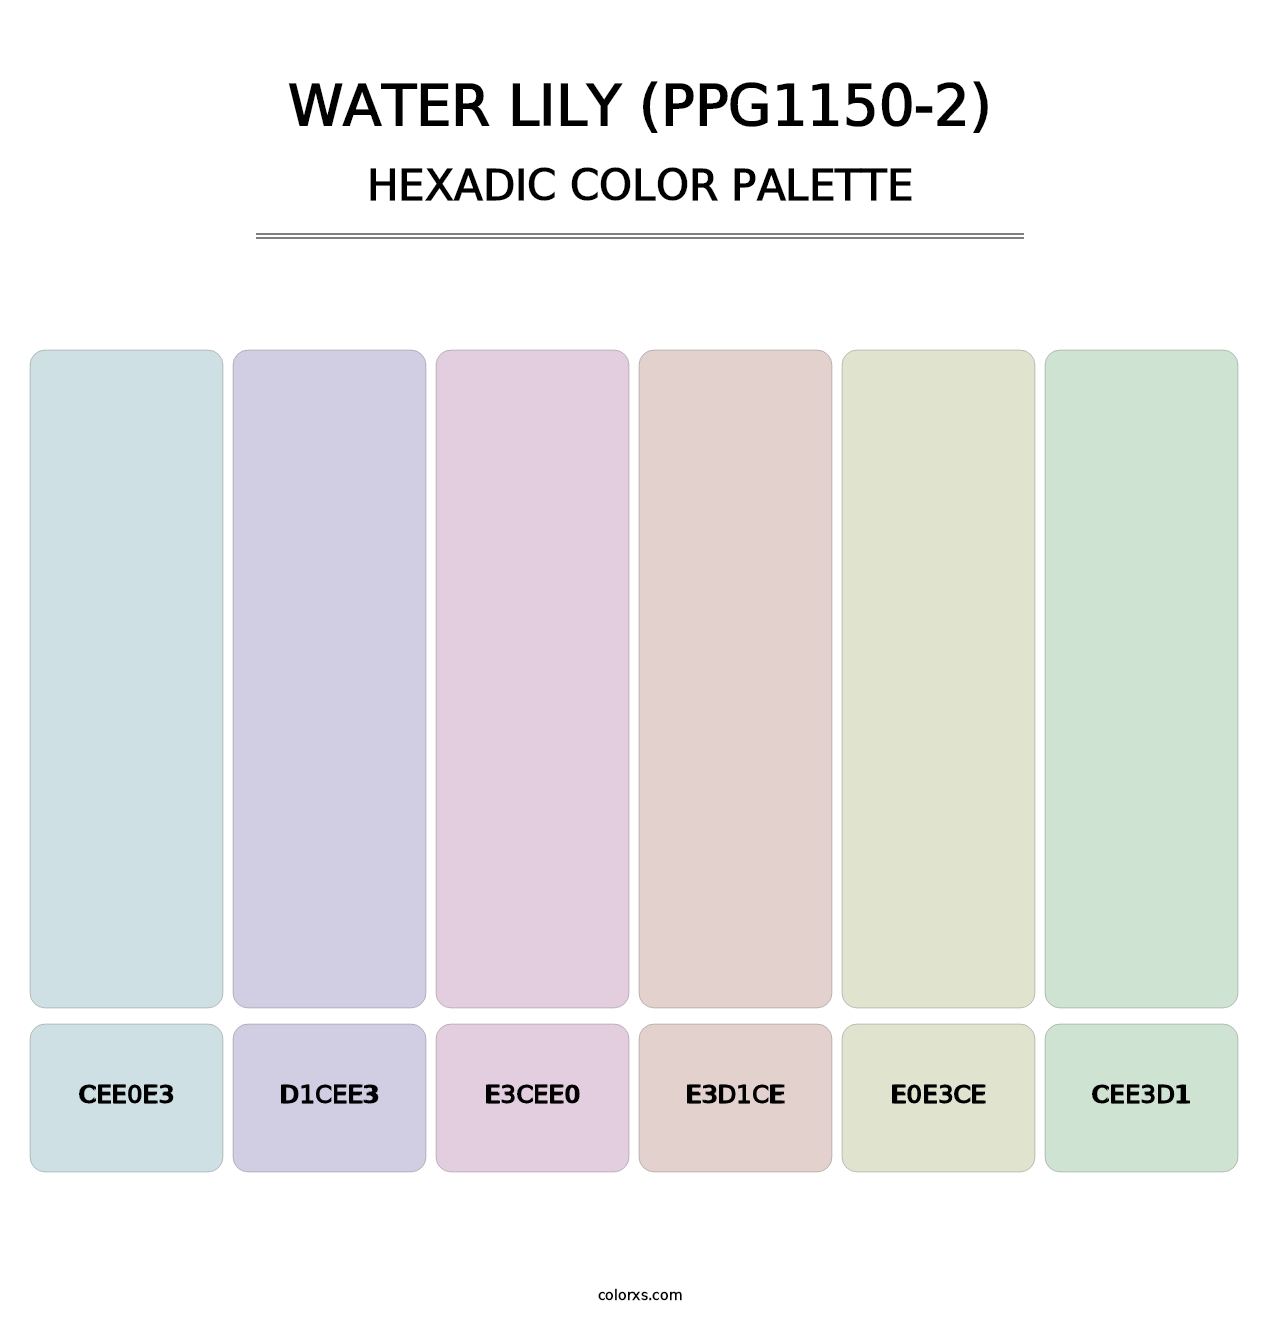 Water Lily (PPG1150-2) - Hexadic Color Palette